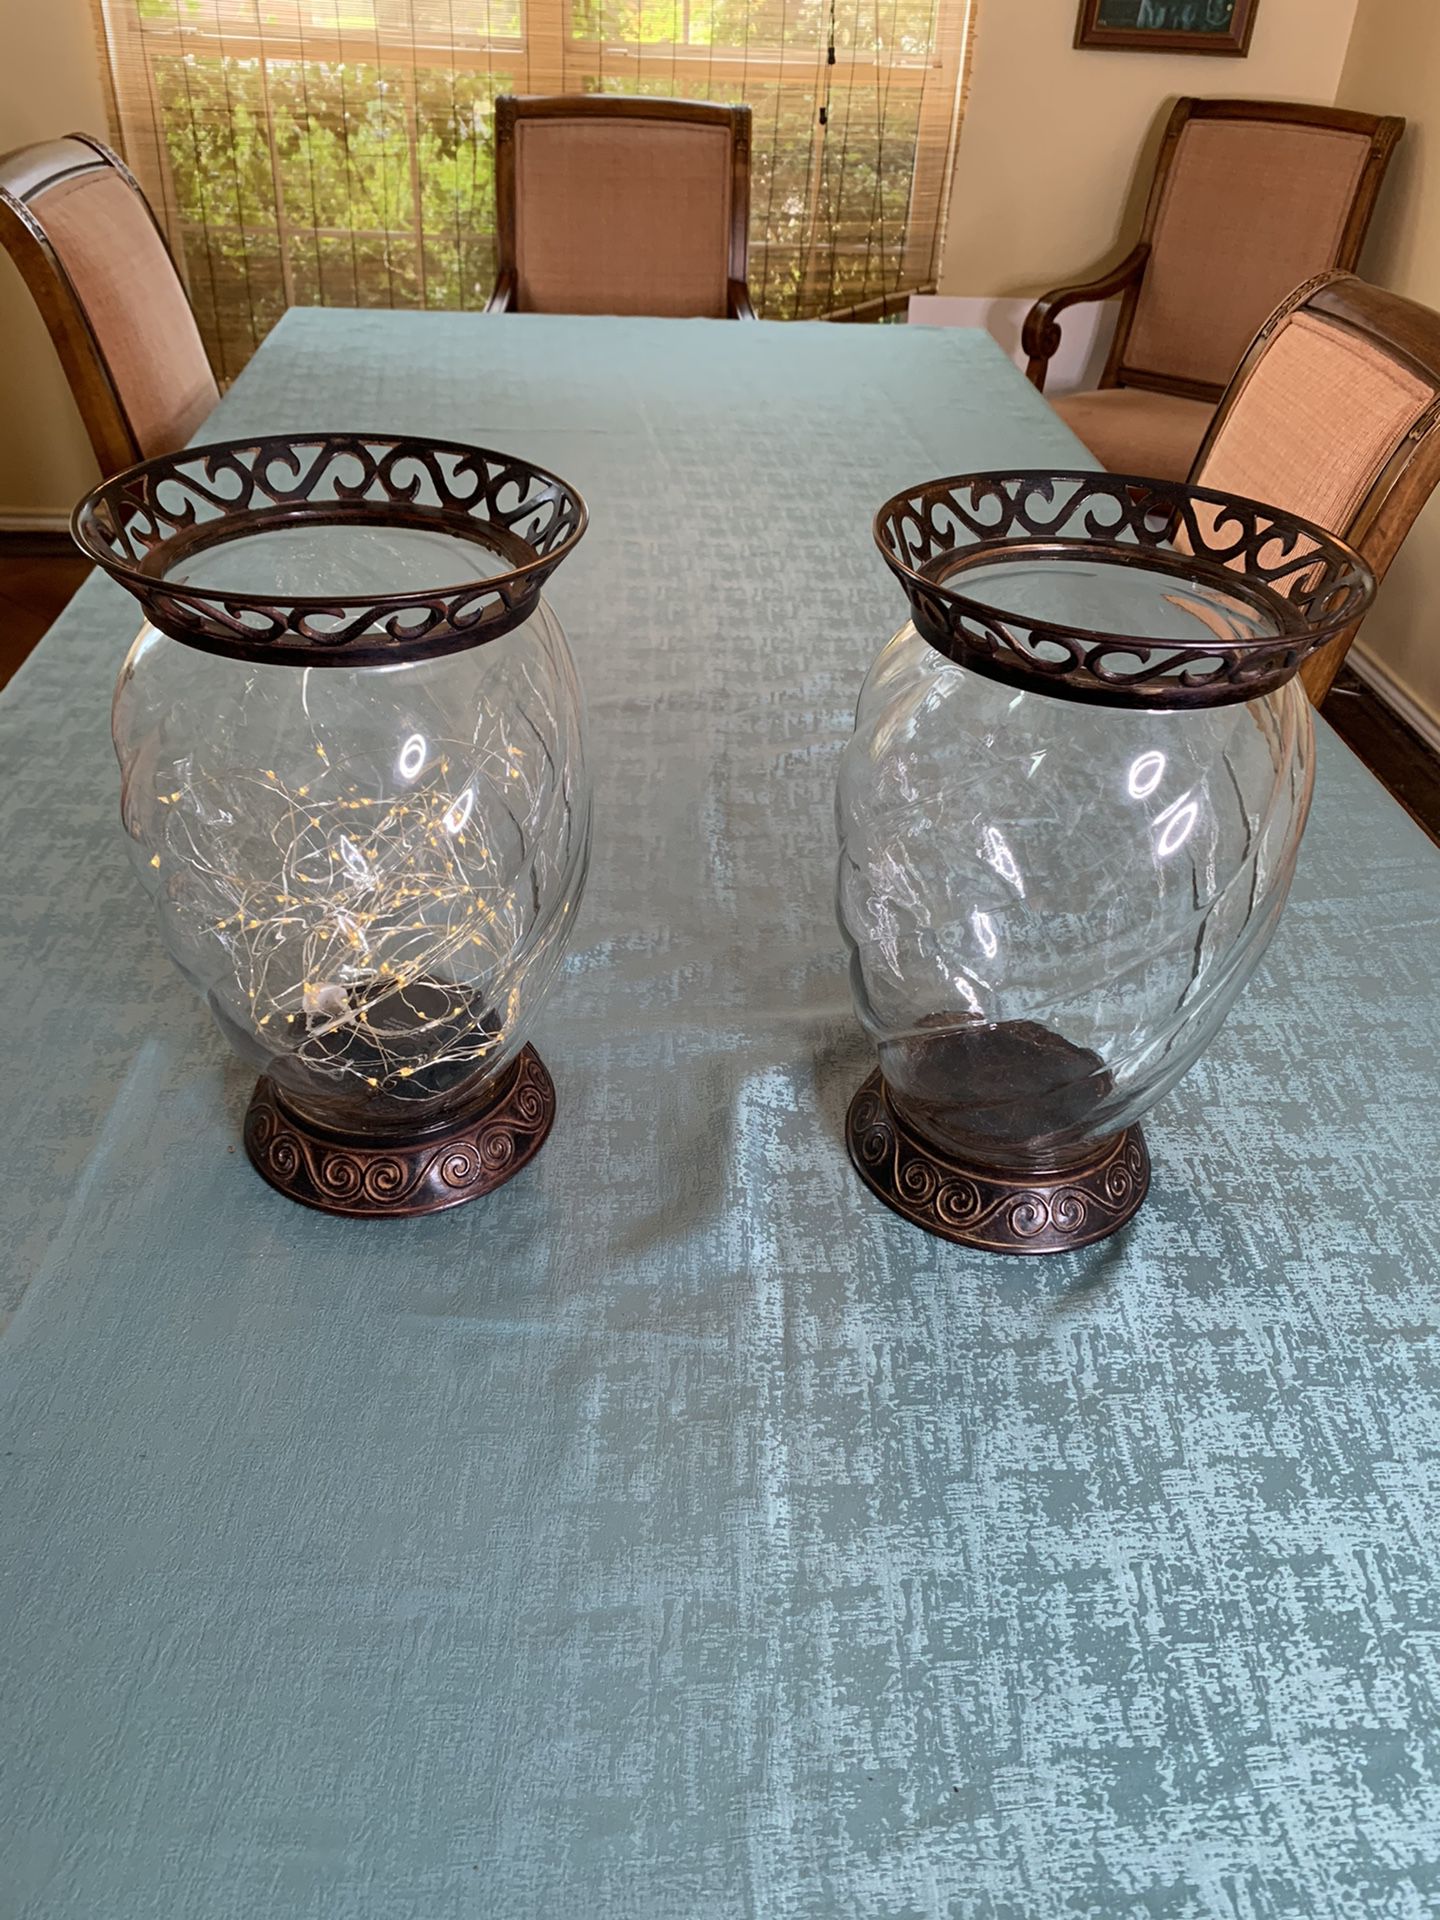 Pier 1 Decorative Candle Holders